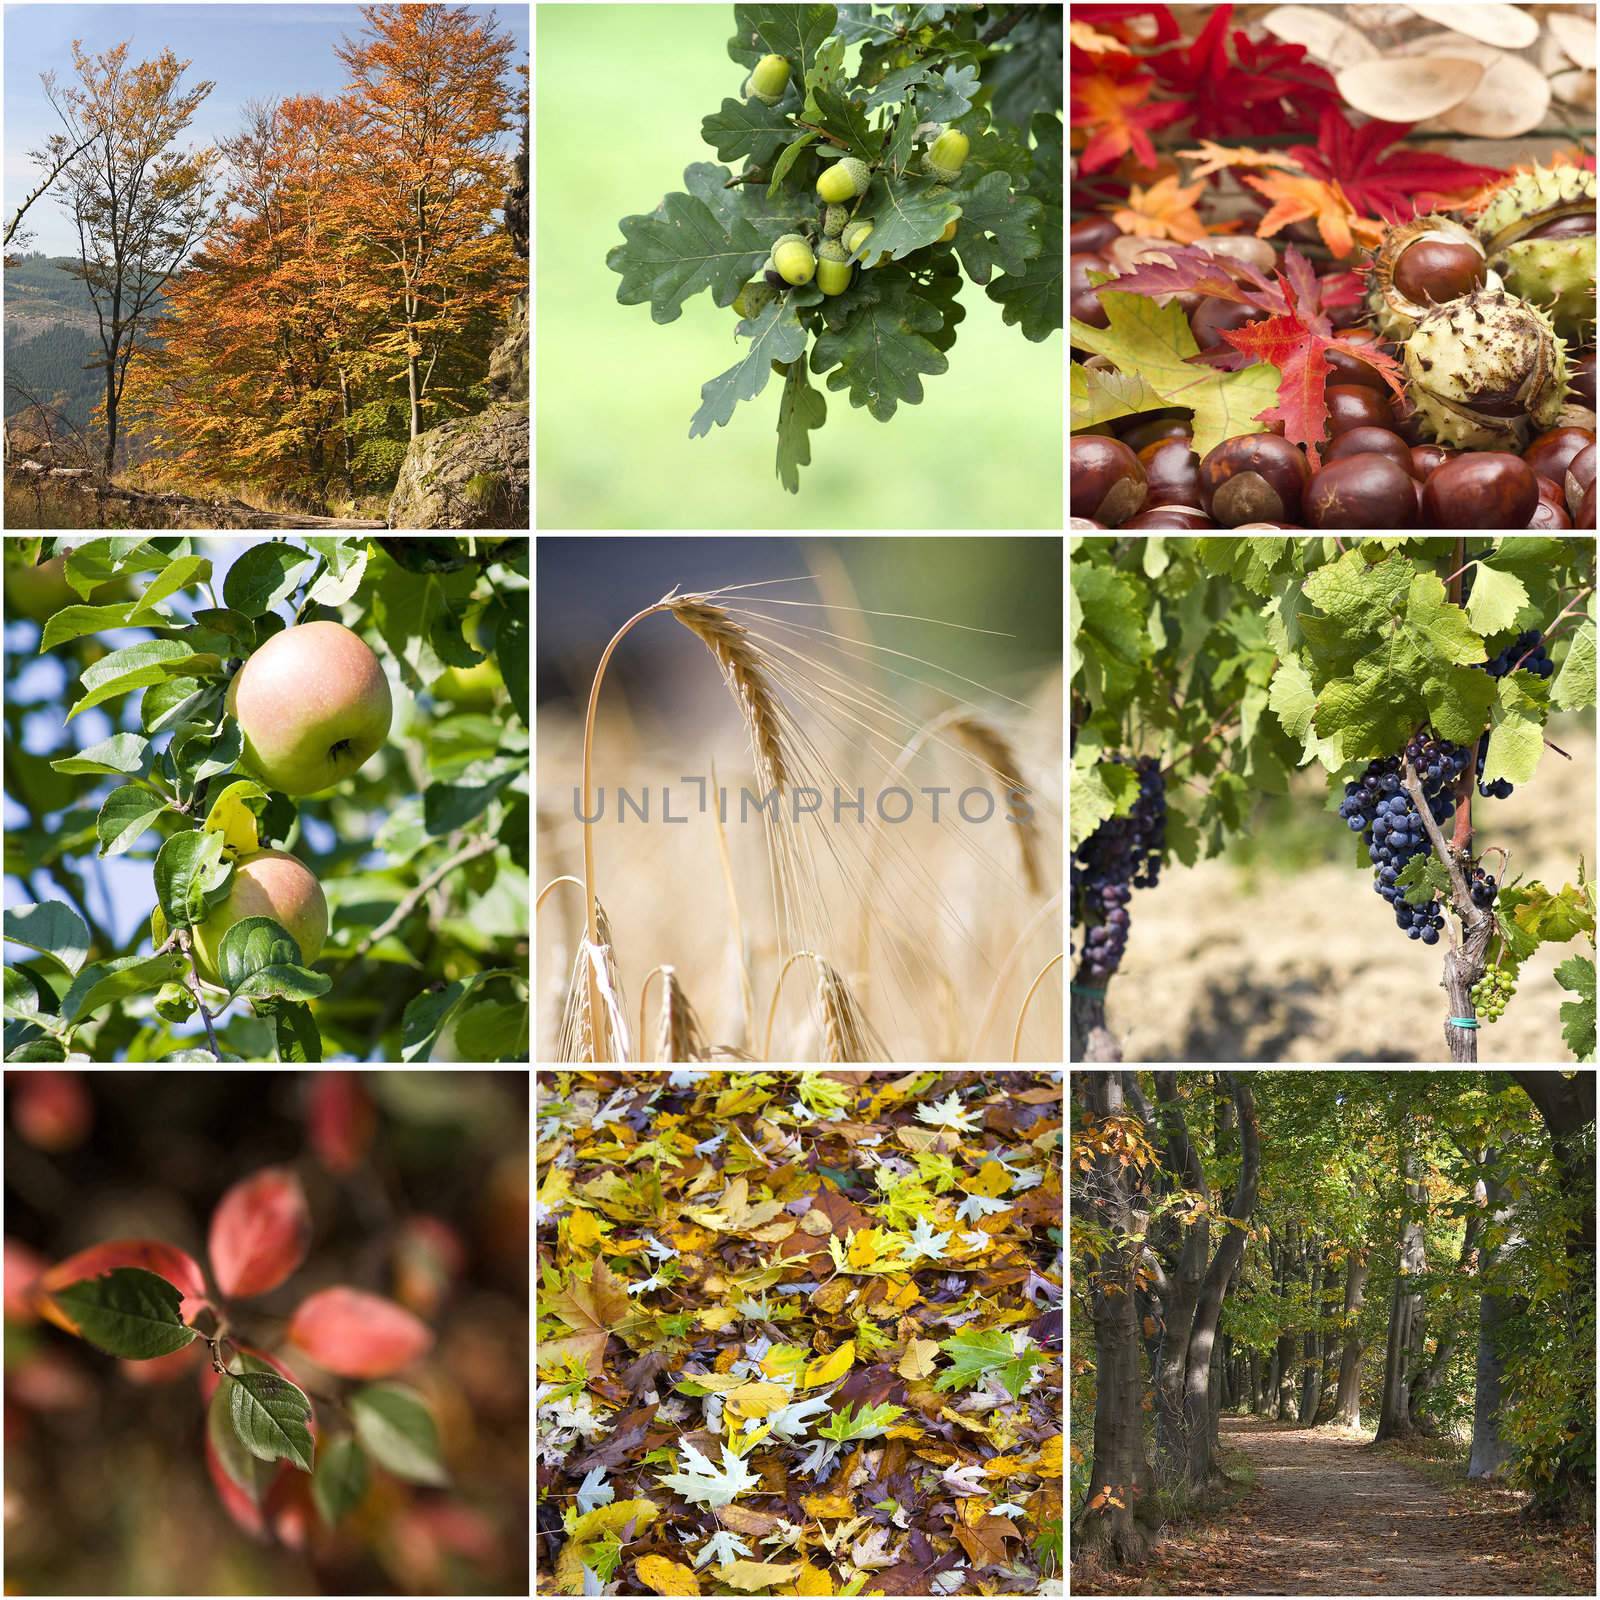 Autumn collage with different autumn pictures  by miradrozdowski